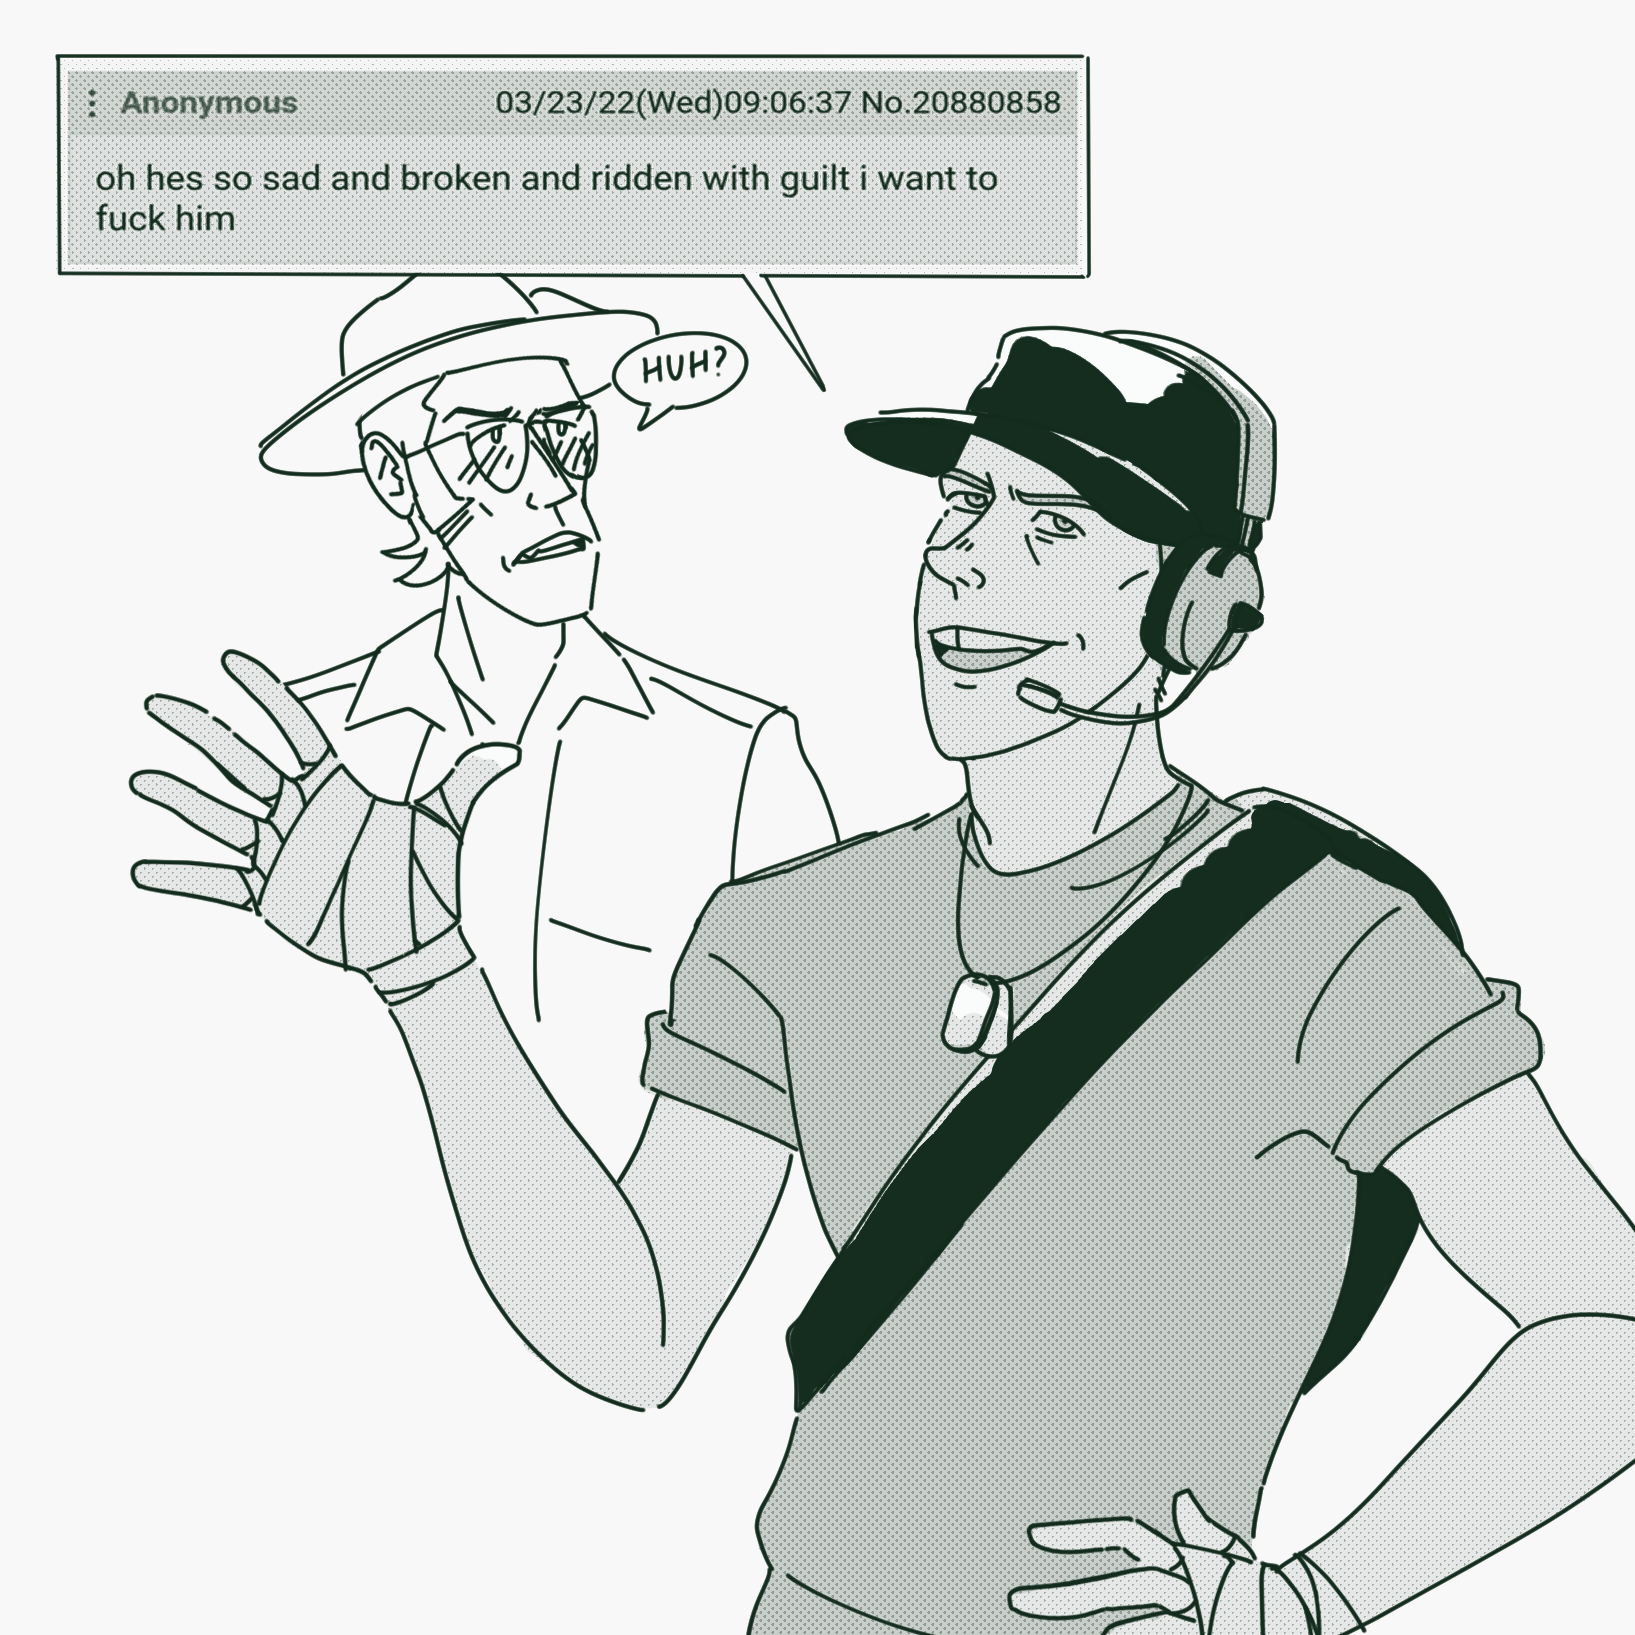 A sketch of Scout saying 'oh he's so sad and broken and ridden with guilt i want to fuck him' with Sniper saying 'huh?' in the background.